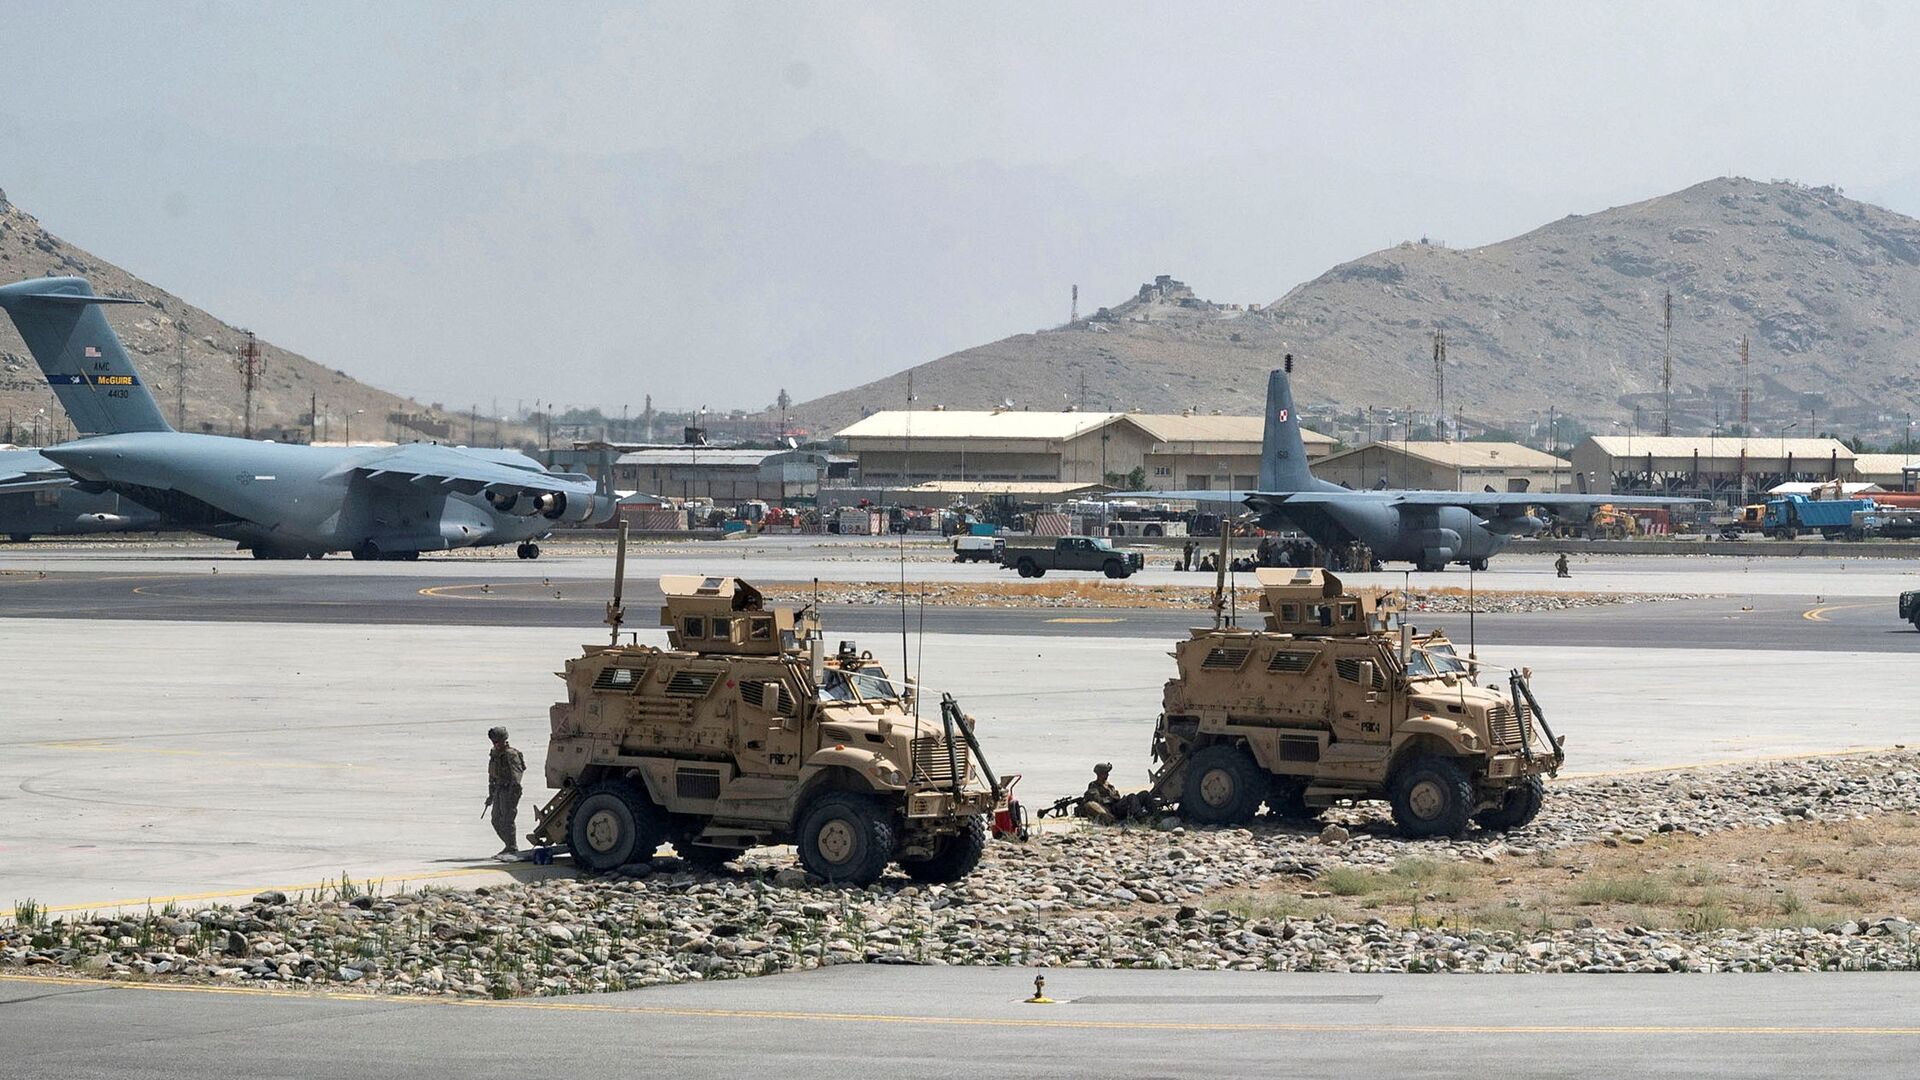 FILE PHOTO: FILE PHOTO: U.S. Army soldiers assigned to the 82nd Airborne Division patrol Hamid Karzai International Airport in Kabul, Afghanistan August 17, 2021. Picture taken August 17, 2021.  U.S. Air Force/Senior Airman Taylor Crul/Handout via REUTERS  THIS IMAGE HAS BEEN SUPPLIED BY A THIRD PARTY. THIS PICTURE WAS PROCESSED BY REUTERS TO ENHANCE QUALITY. AN UNPROCESSED VERSION HAS BEEN PROVIDED SEPARATELY./File Photo/File Photo - Sputnik International, 1920, 07.09.2021